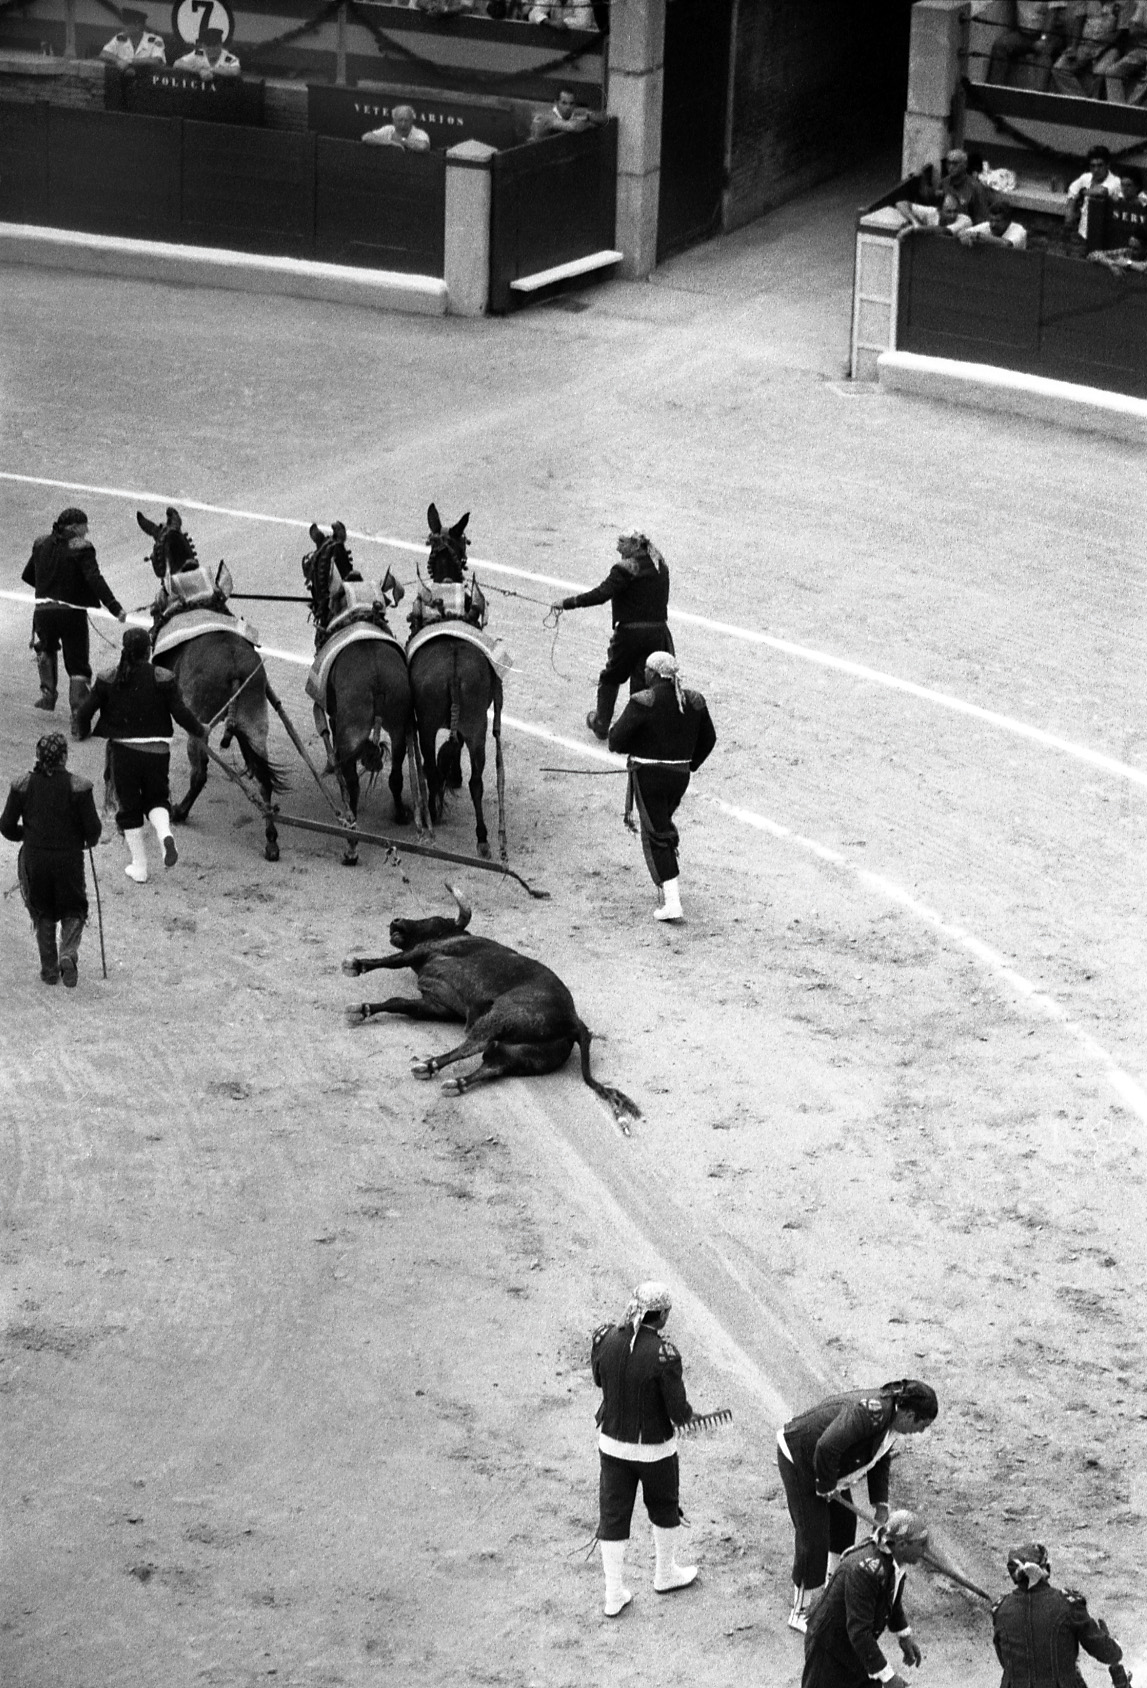 Carcass of a dead bull being dragged from the arena.